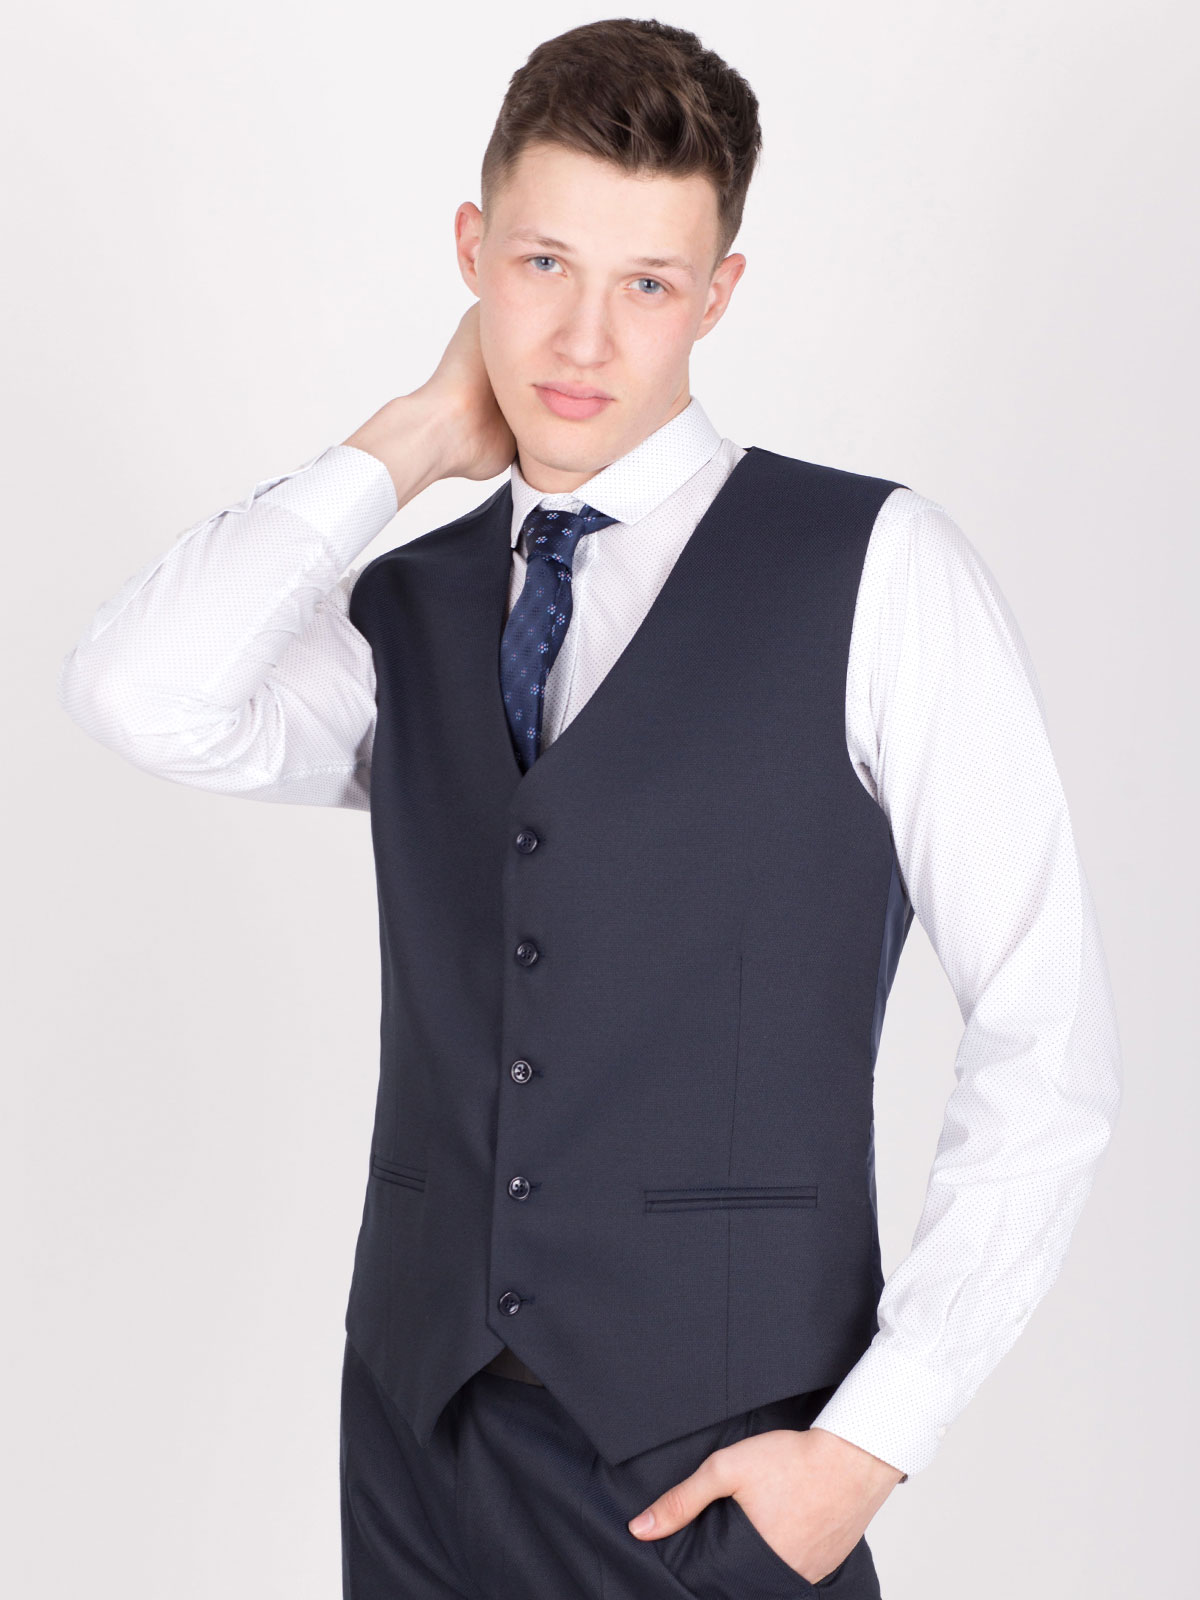  classic navy blue small cell vest  - 44053 € 21.93 img2